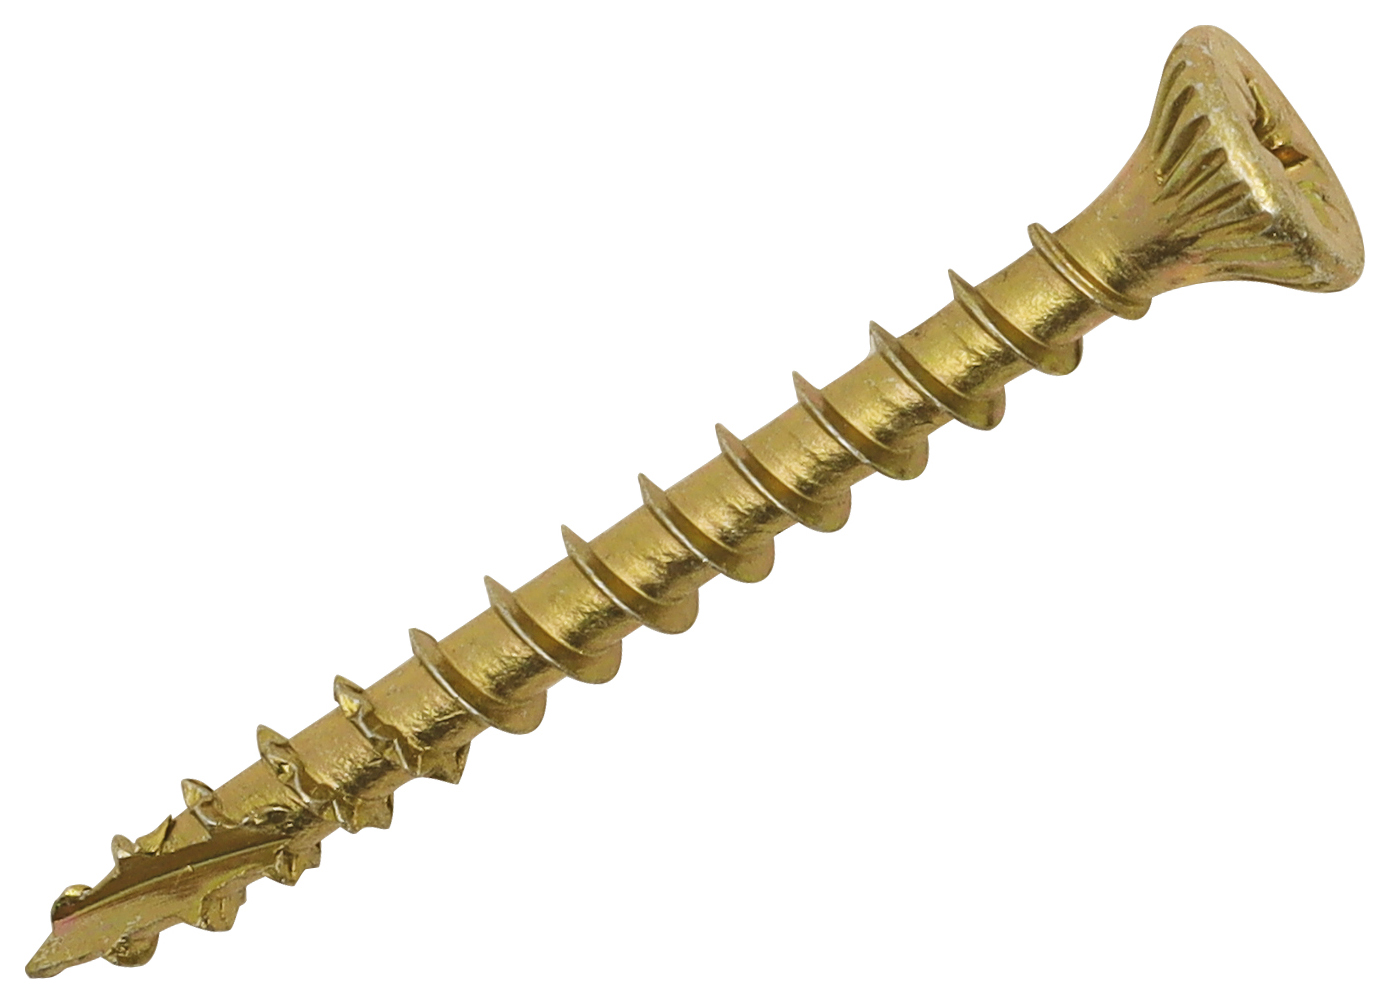 Image of Optimaxx PZ Countersunk Passivated Double Reinforced Wood Screw Maxxtub - 5 x 50mm - Pack of 600